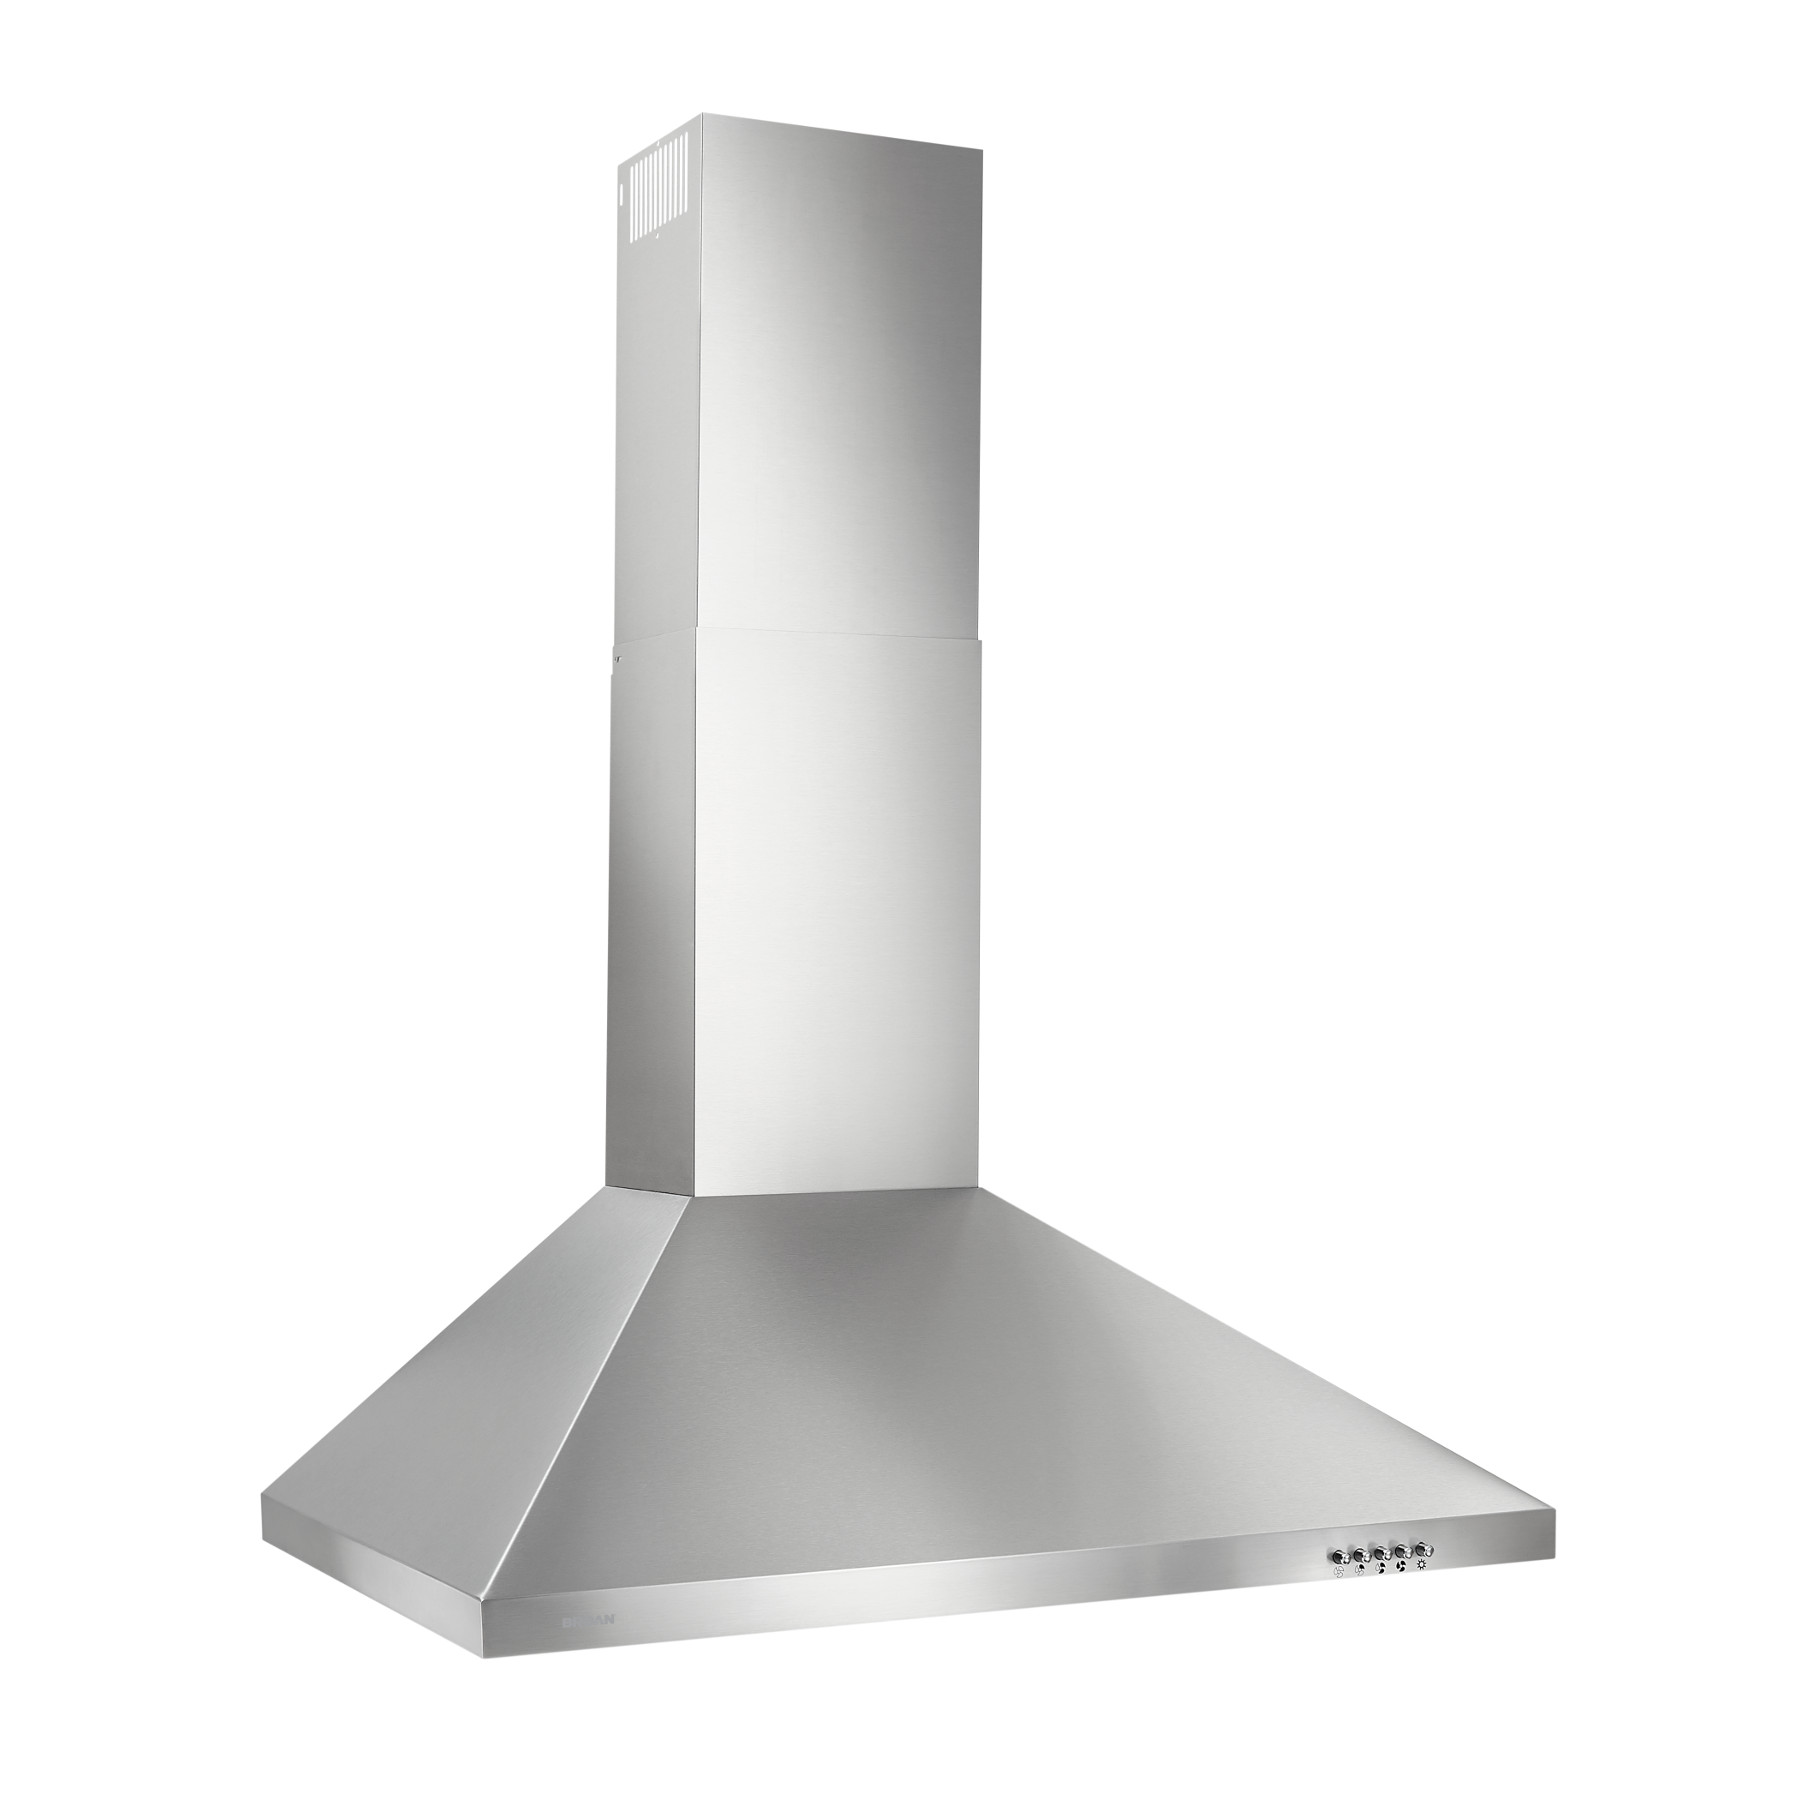 Exhaust Fan for Kitchen 480 CFM 27.6 x 35.44 Stainless Steel Broan-Nutone E5490SS Elite Island Chimney Range Hood with Light 